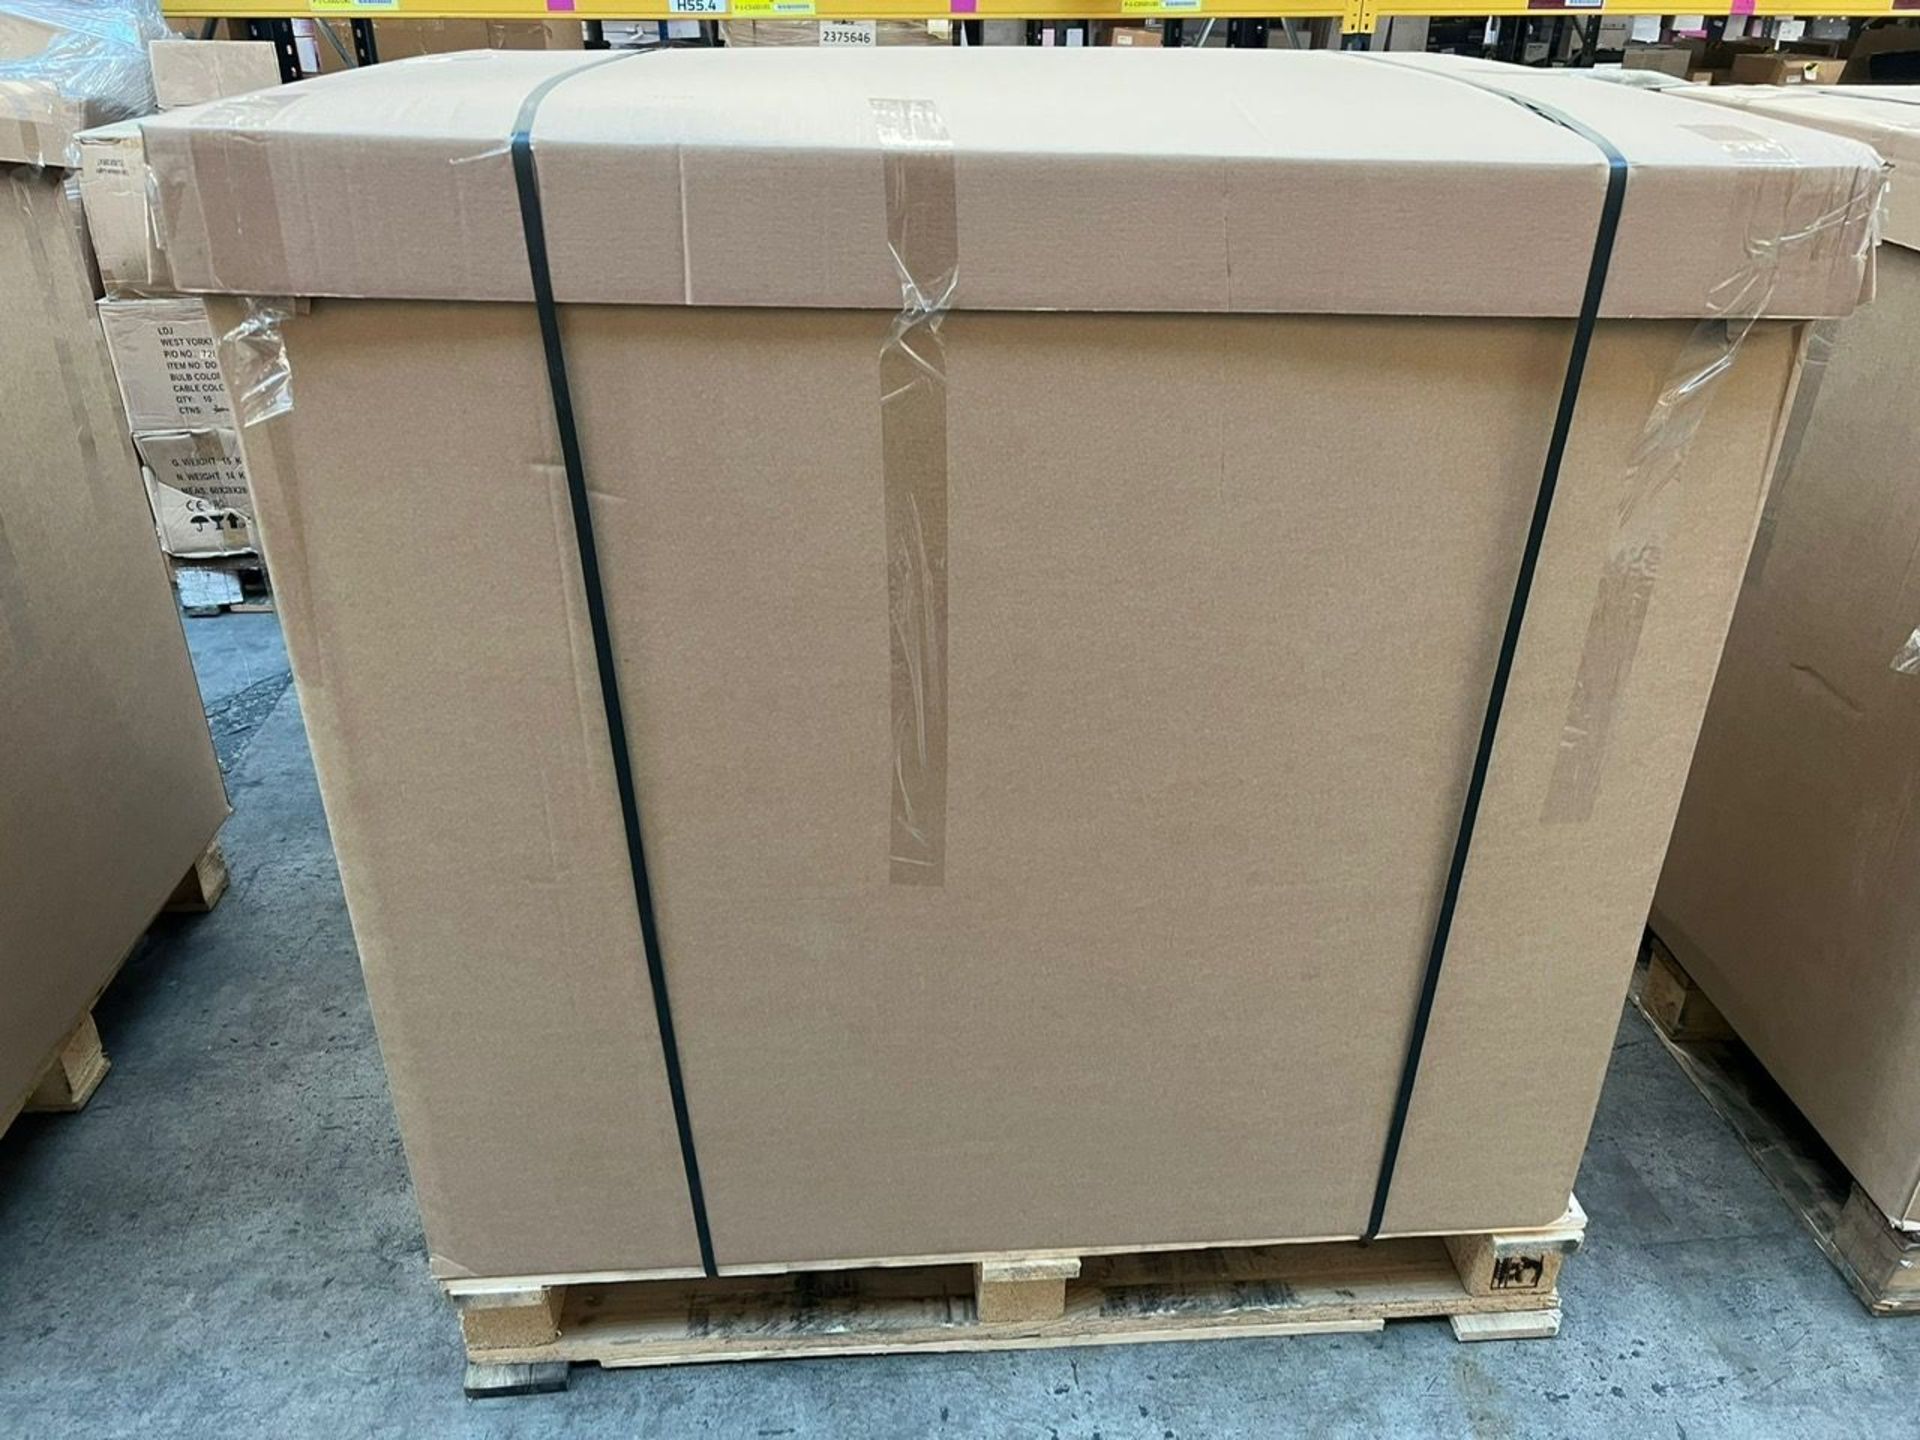 UNOPENED UNCHECKED PALLET OF NEW END OF LINE STOCK DIRECT FROM A MAJOR UK DIY STORE. ALL PALLETS ARE - Bild 4 aus 4